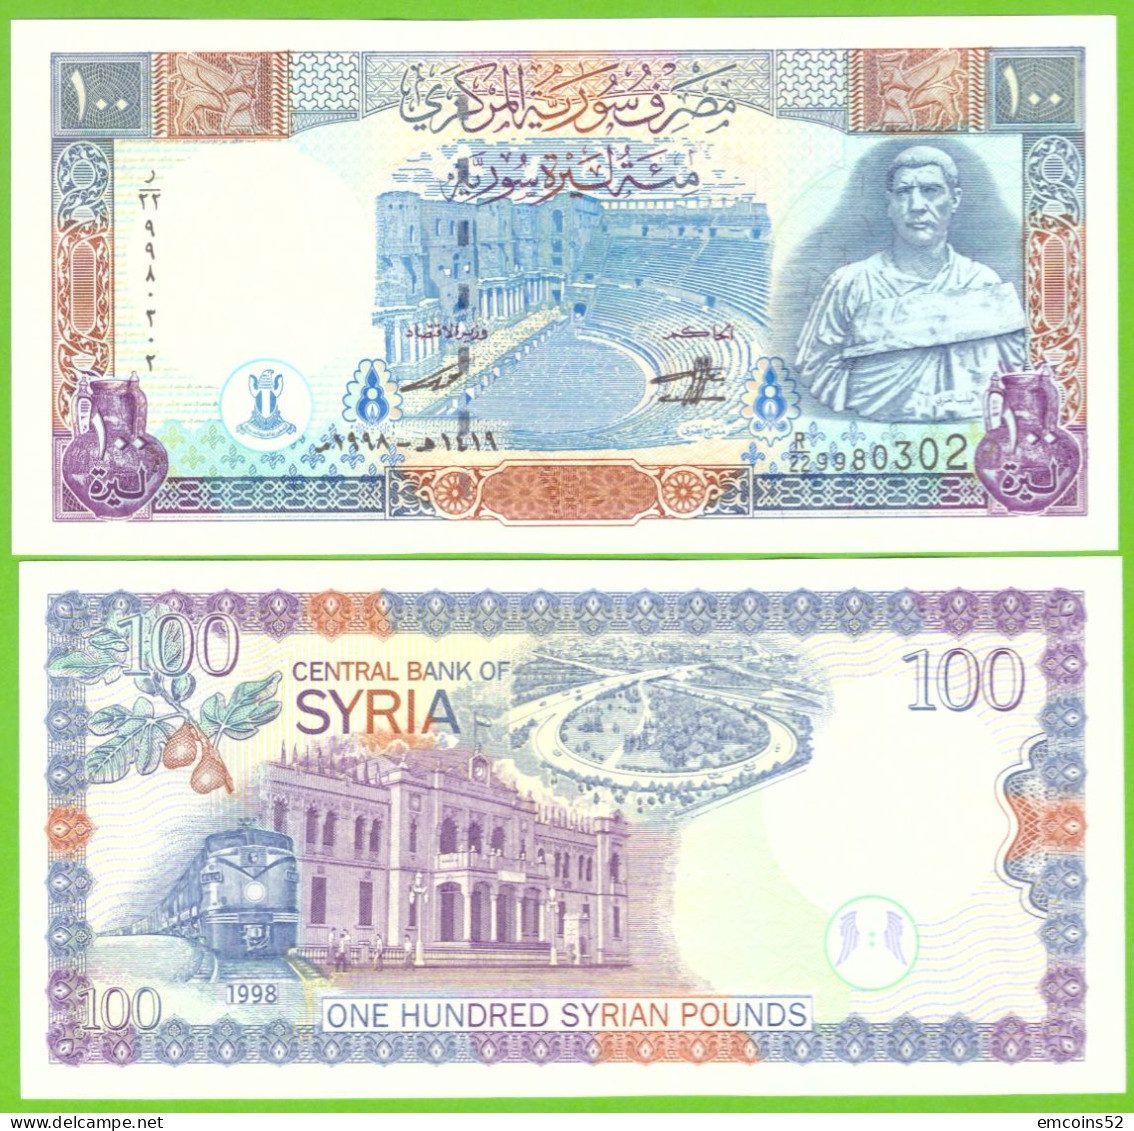 SYRIA 100 POUNDS 1998 P-108 UNC - Syrie